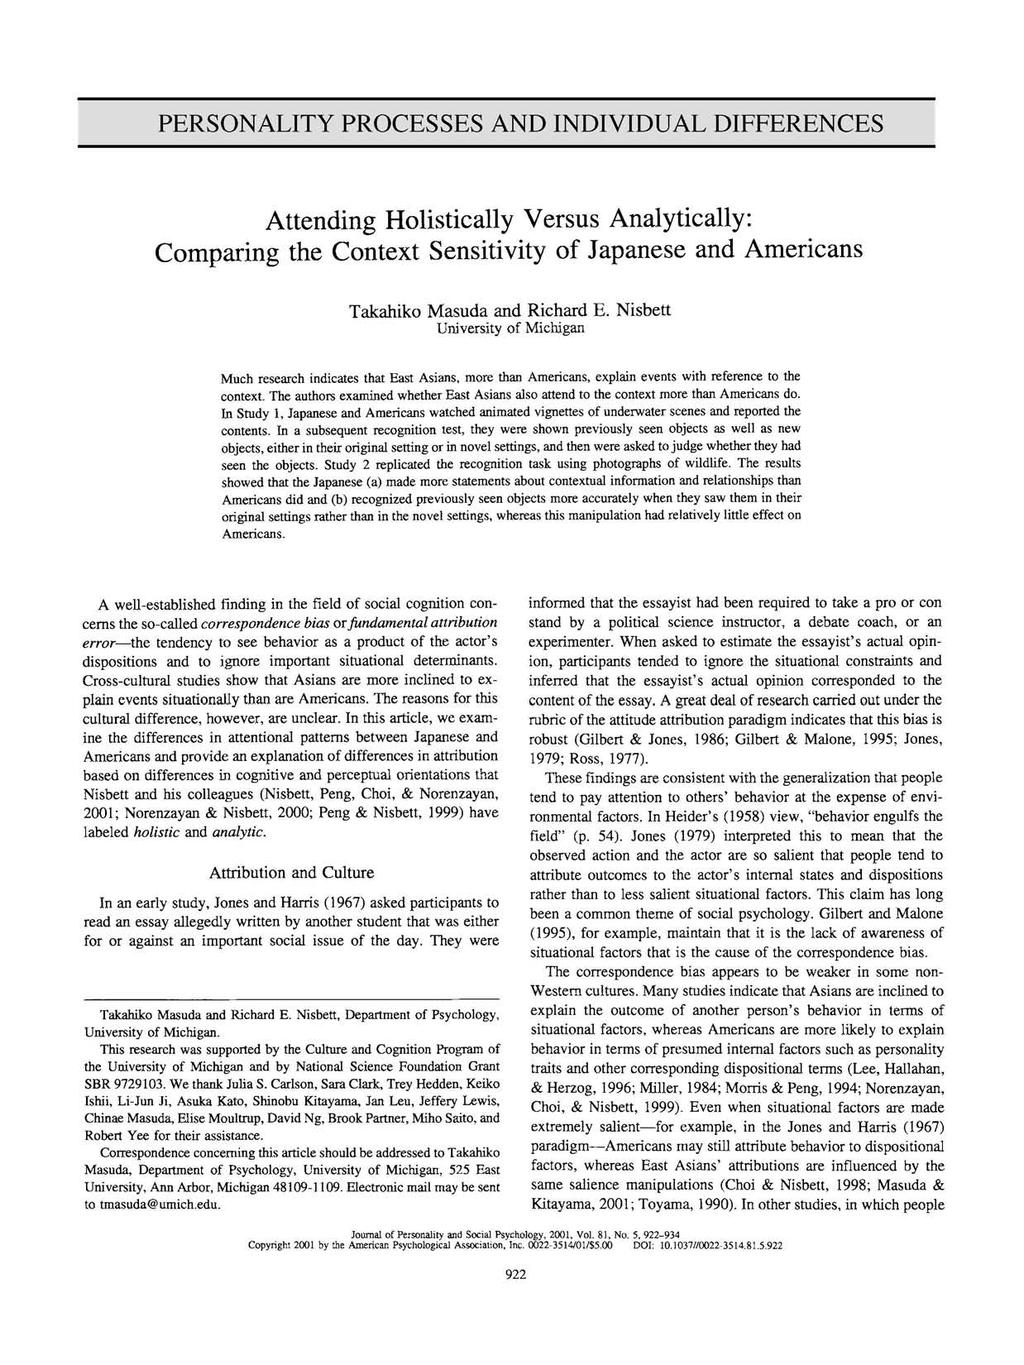 PERSONALITY PROCESSES AND INDIVIDUAL DIFFERENCES Attending Holistically Versus Analytically: Comparing the Context Sensitivity of Japanese and Americans Takahiko Masuda and Richard E.